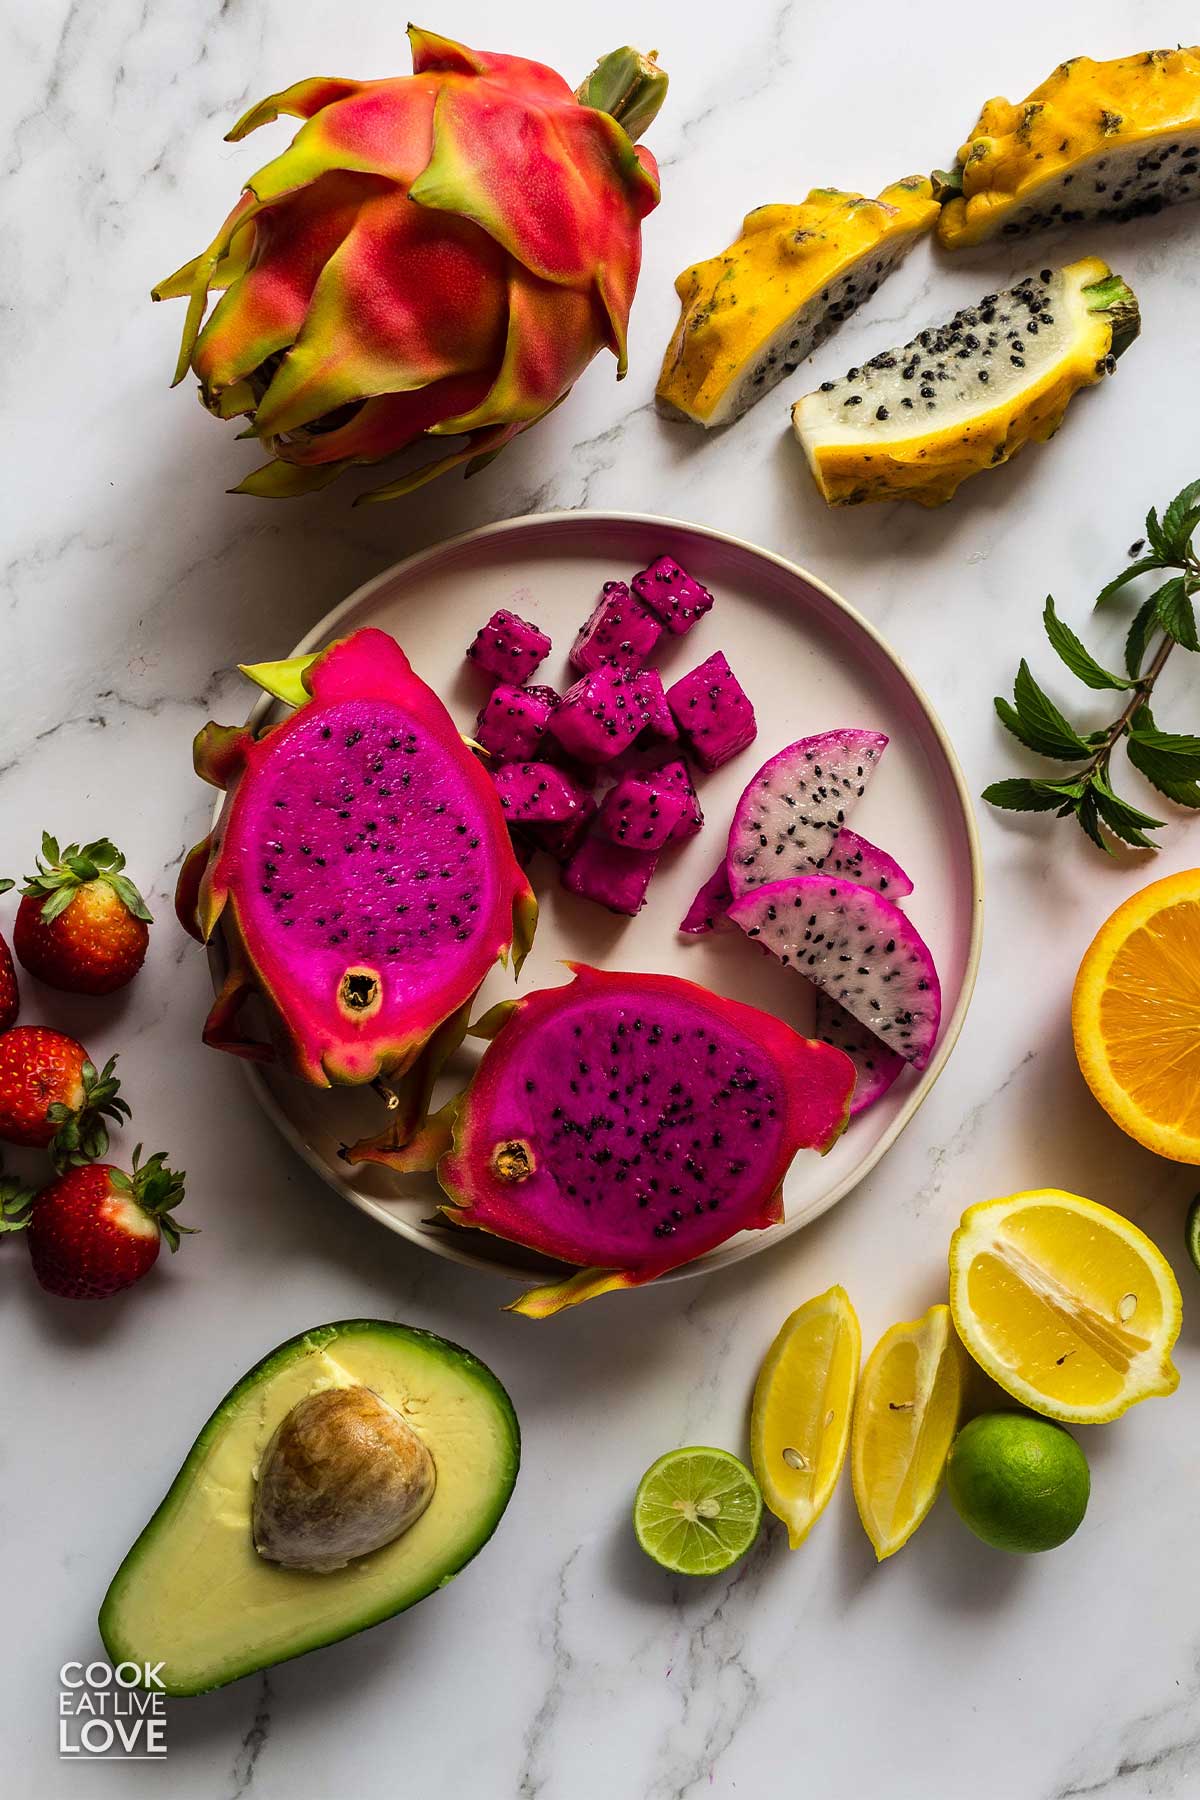 Overhead of dragon fruit whole and cut on the table surrounded by citrus, avocado, strawberries and other fruits.